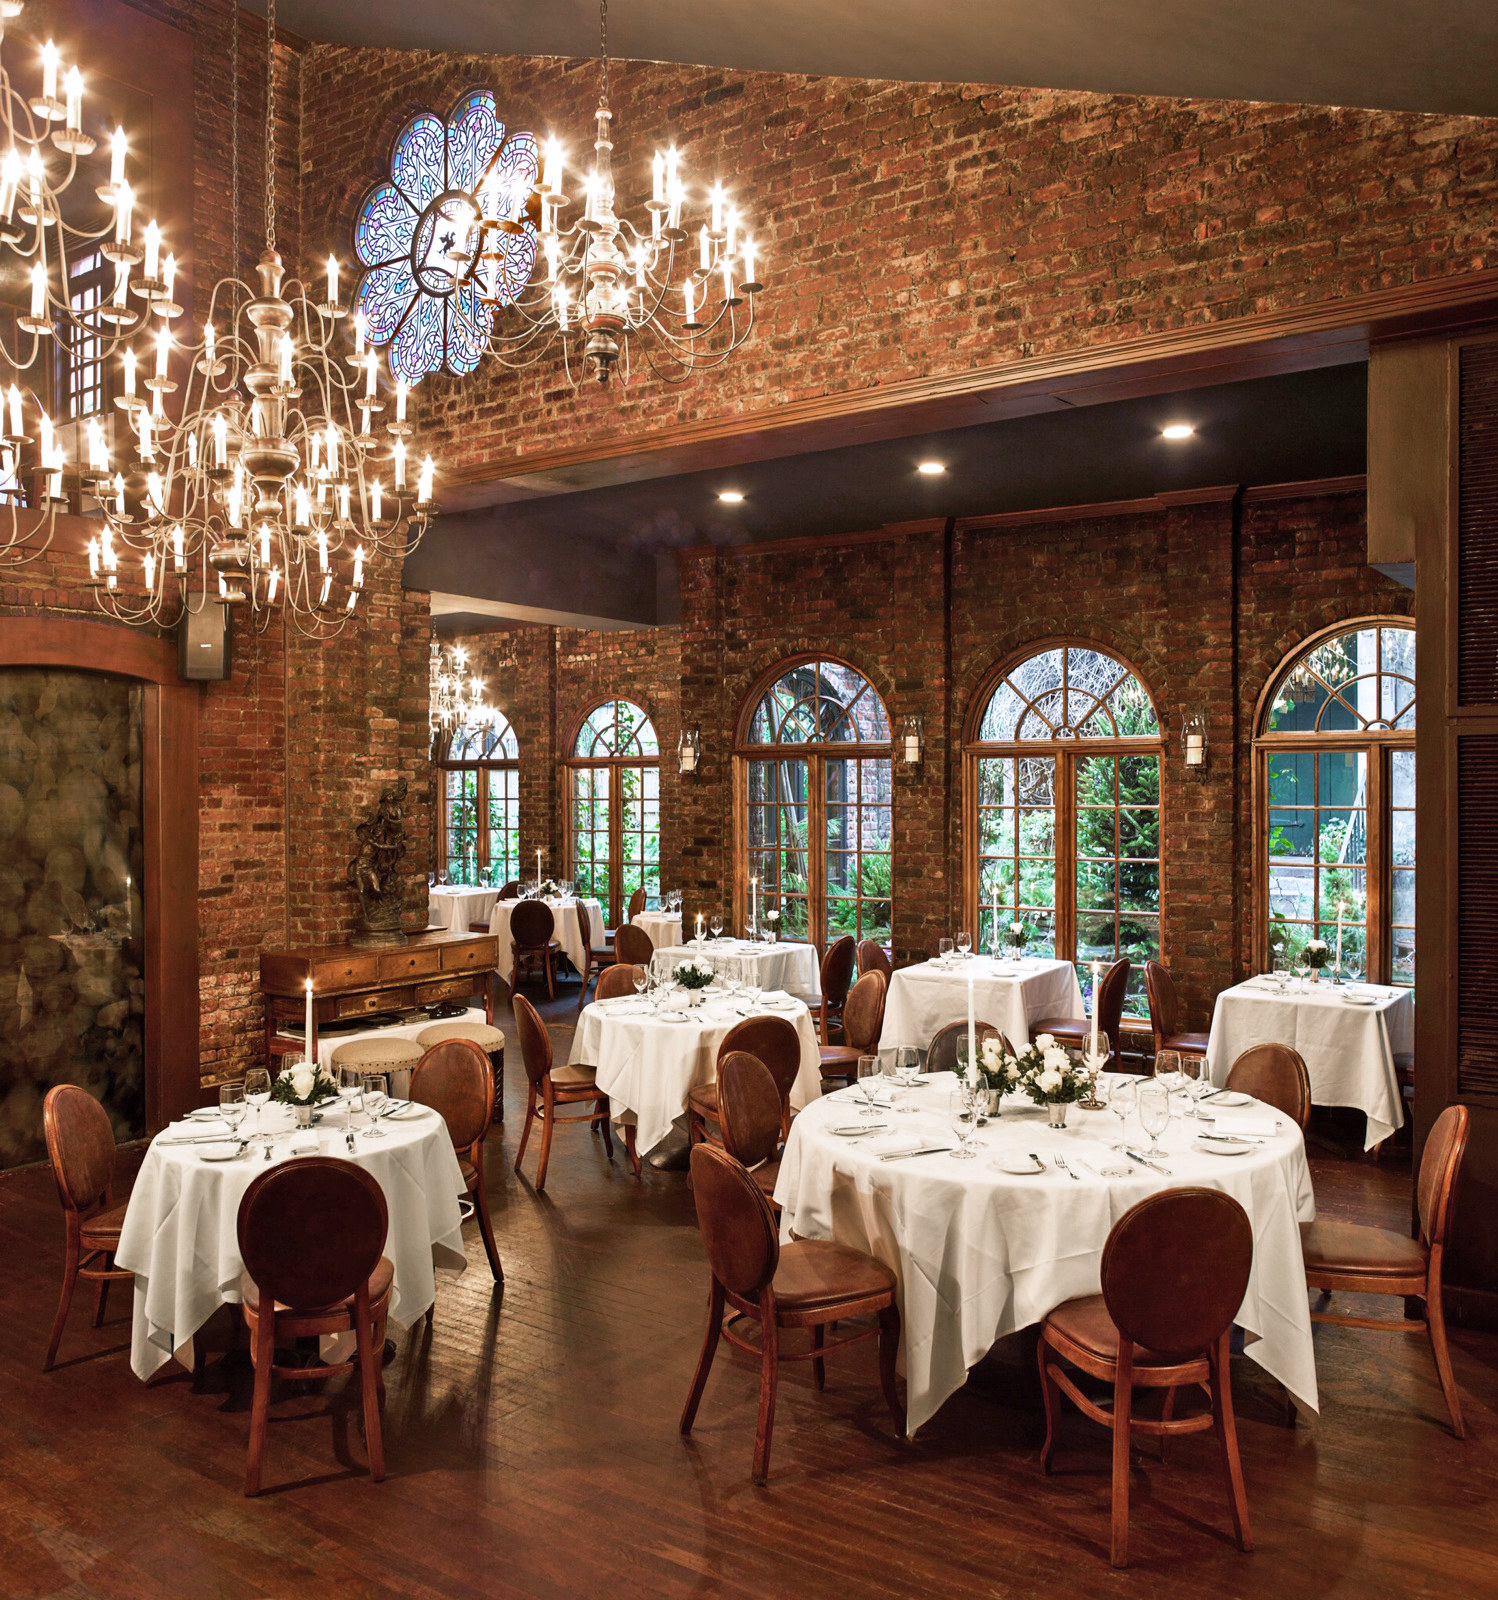 The Most Romantic Restaurants in the World | HuffPost